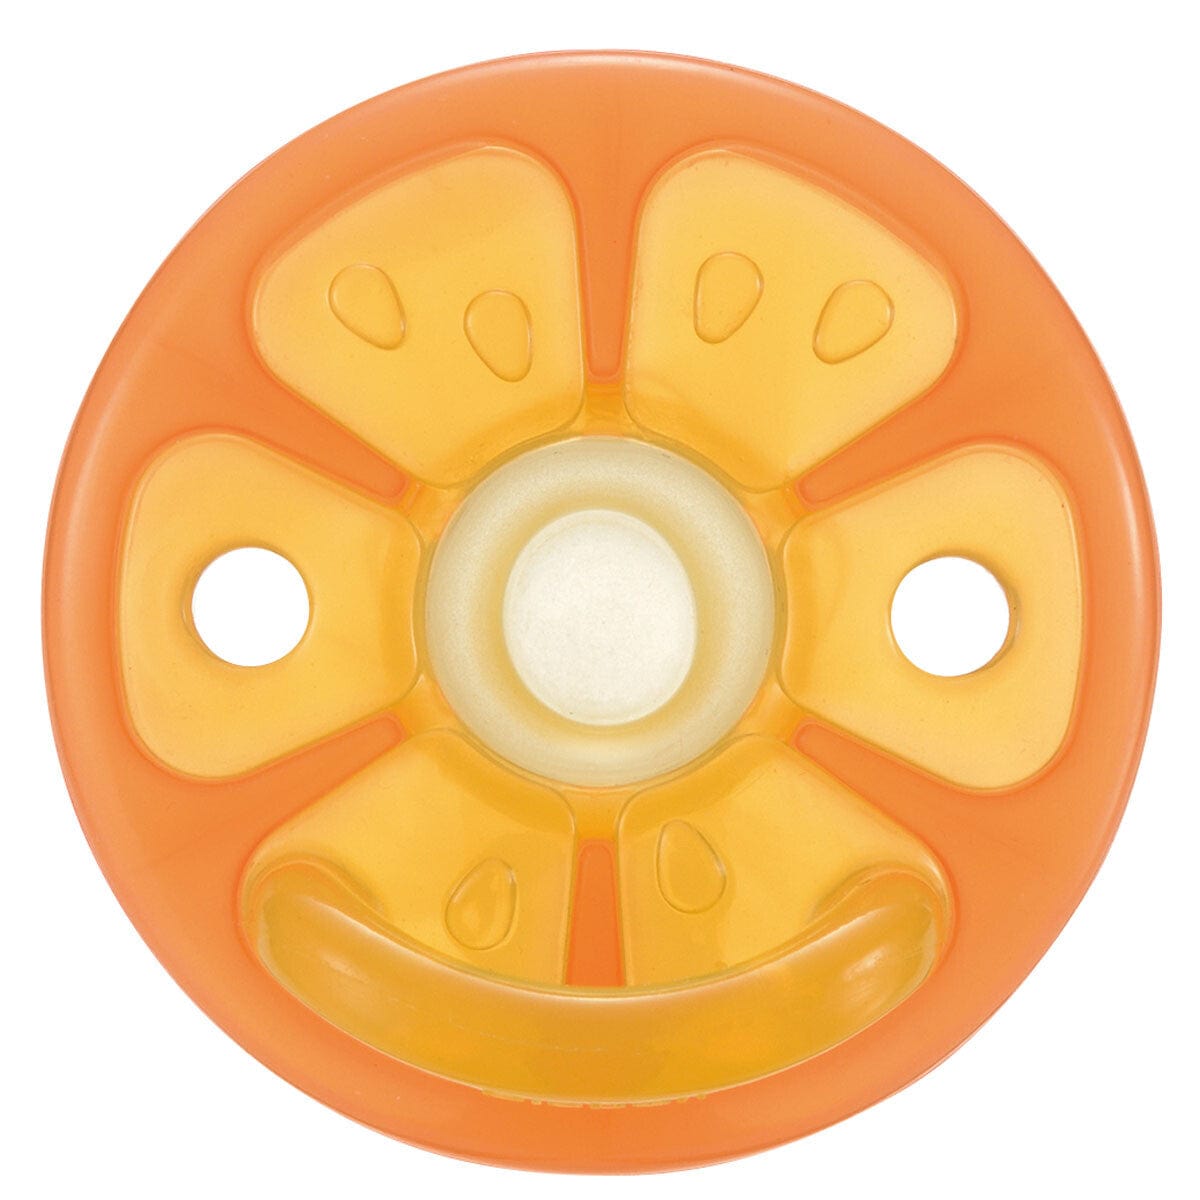 Richell - New Born Baby Silicone Pacifier with Storage Case - Orange Baby Pacifiers 4945680202930 Durio.sg